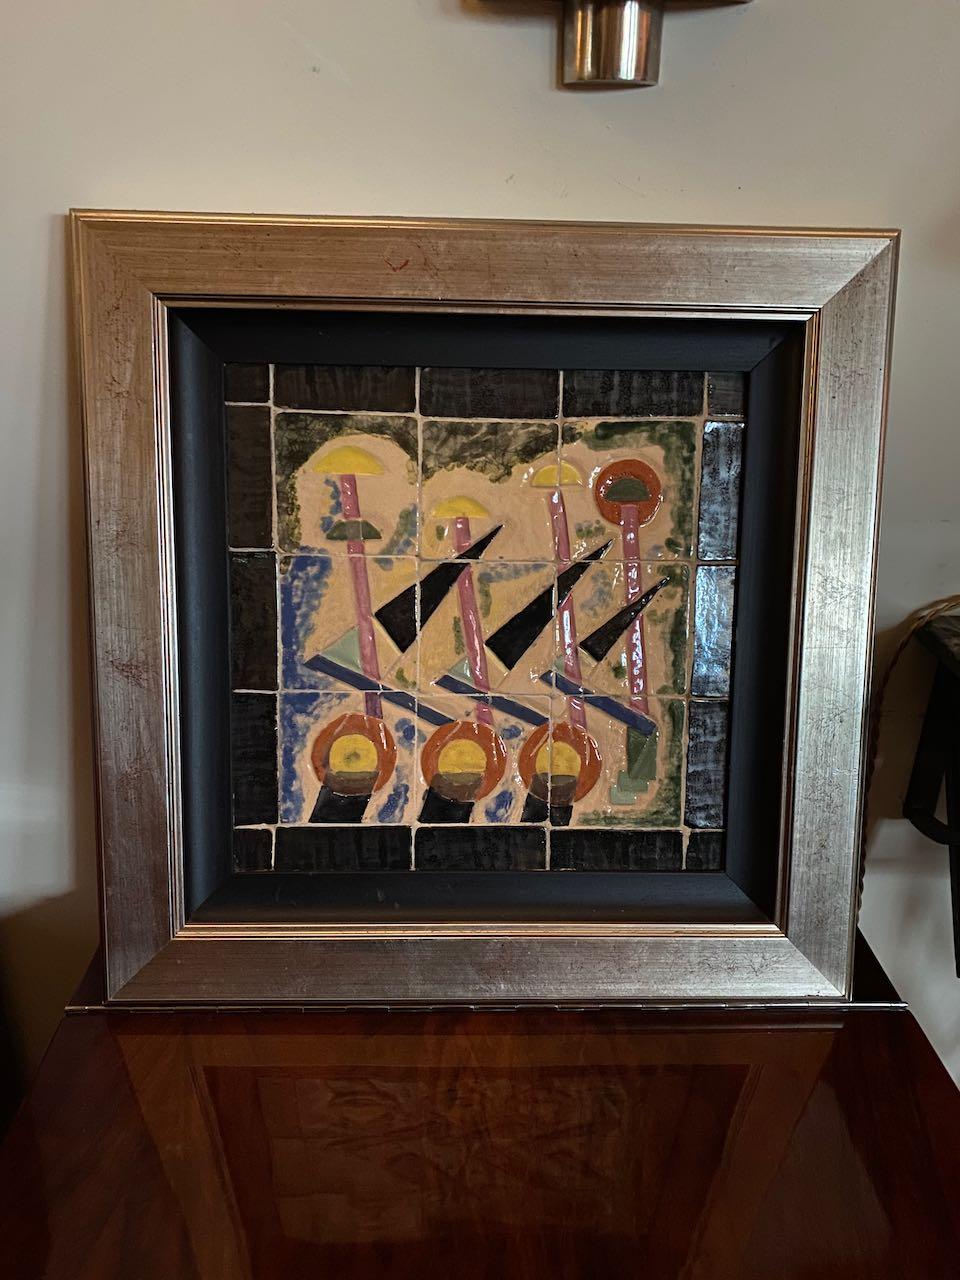 Art Deco modernist tile painting. Hand painted enamel tiles with a canvas painterly quality. The design is somewhat cubist symmetrical and very dynamic. Super quality, colors of black, gray, pink topaz, yellow and orange.

This is a one of kind